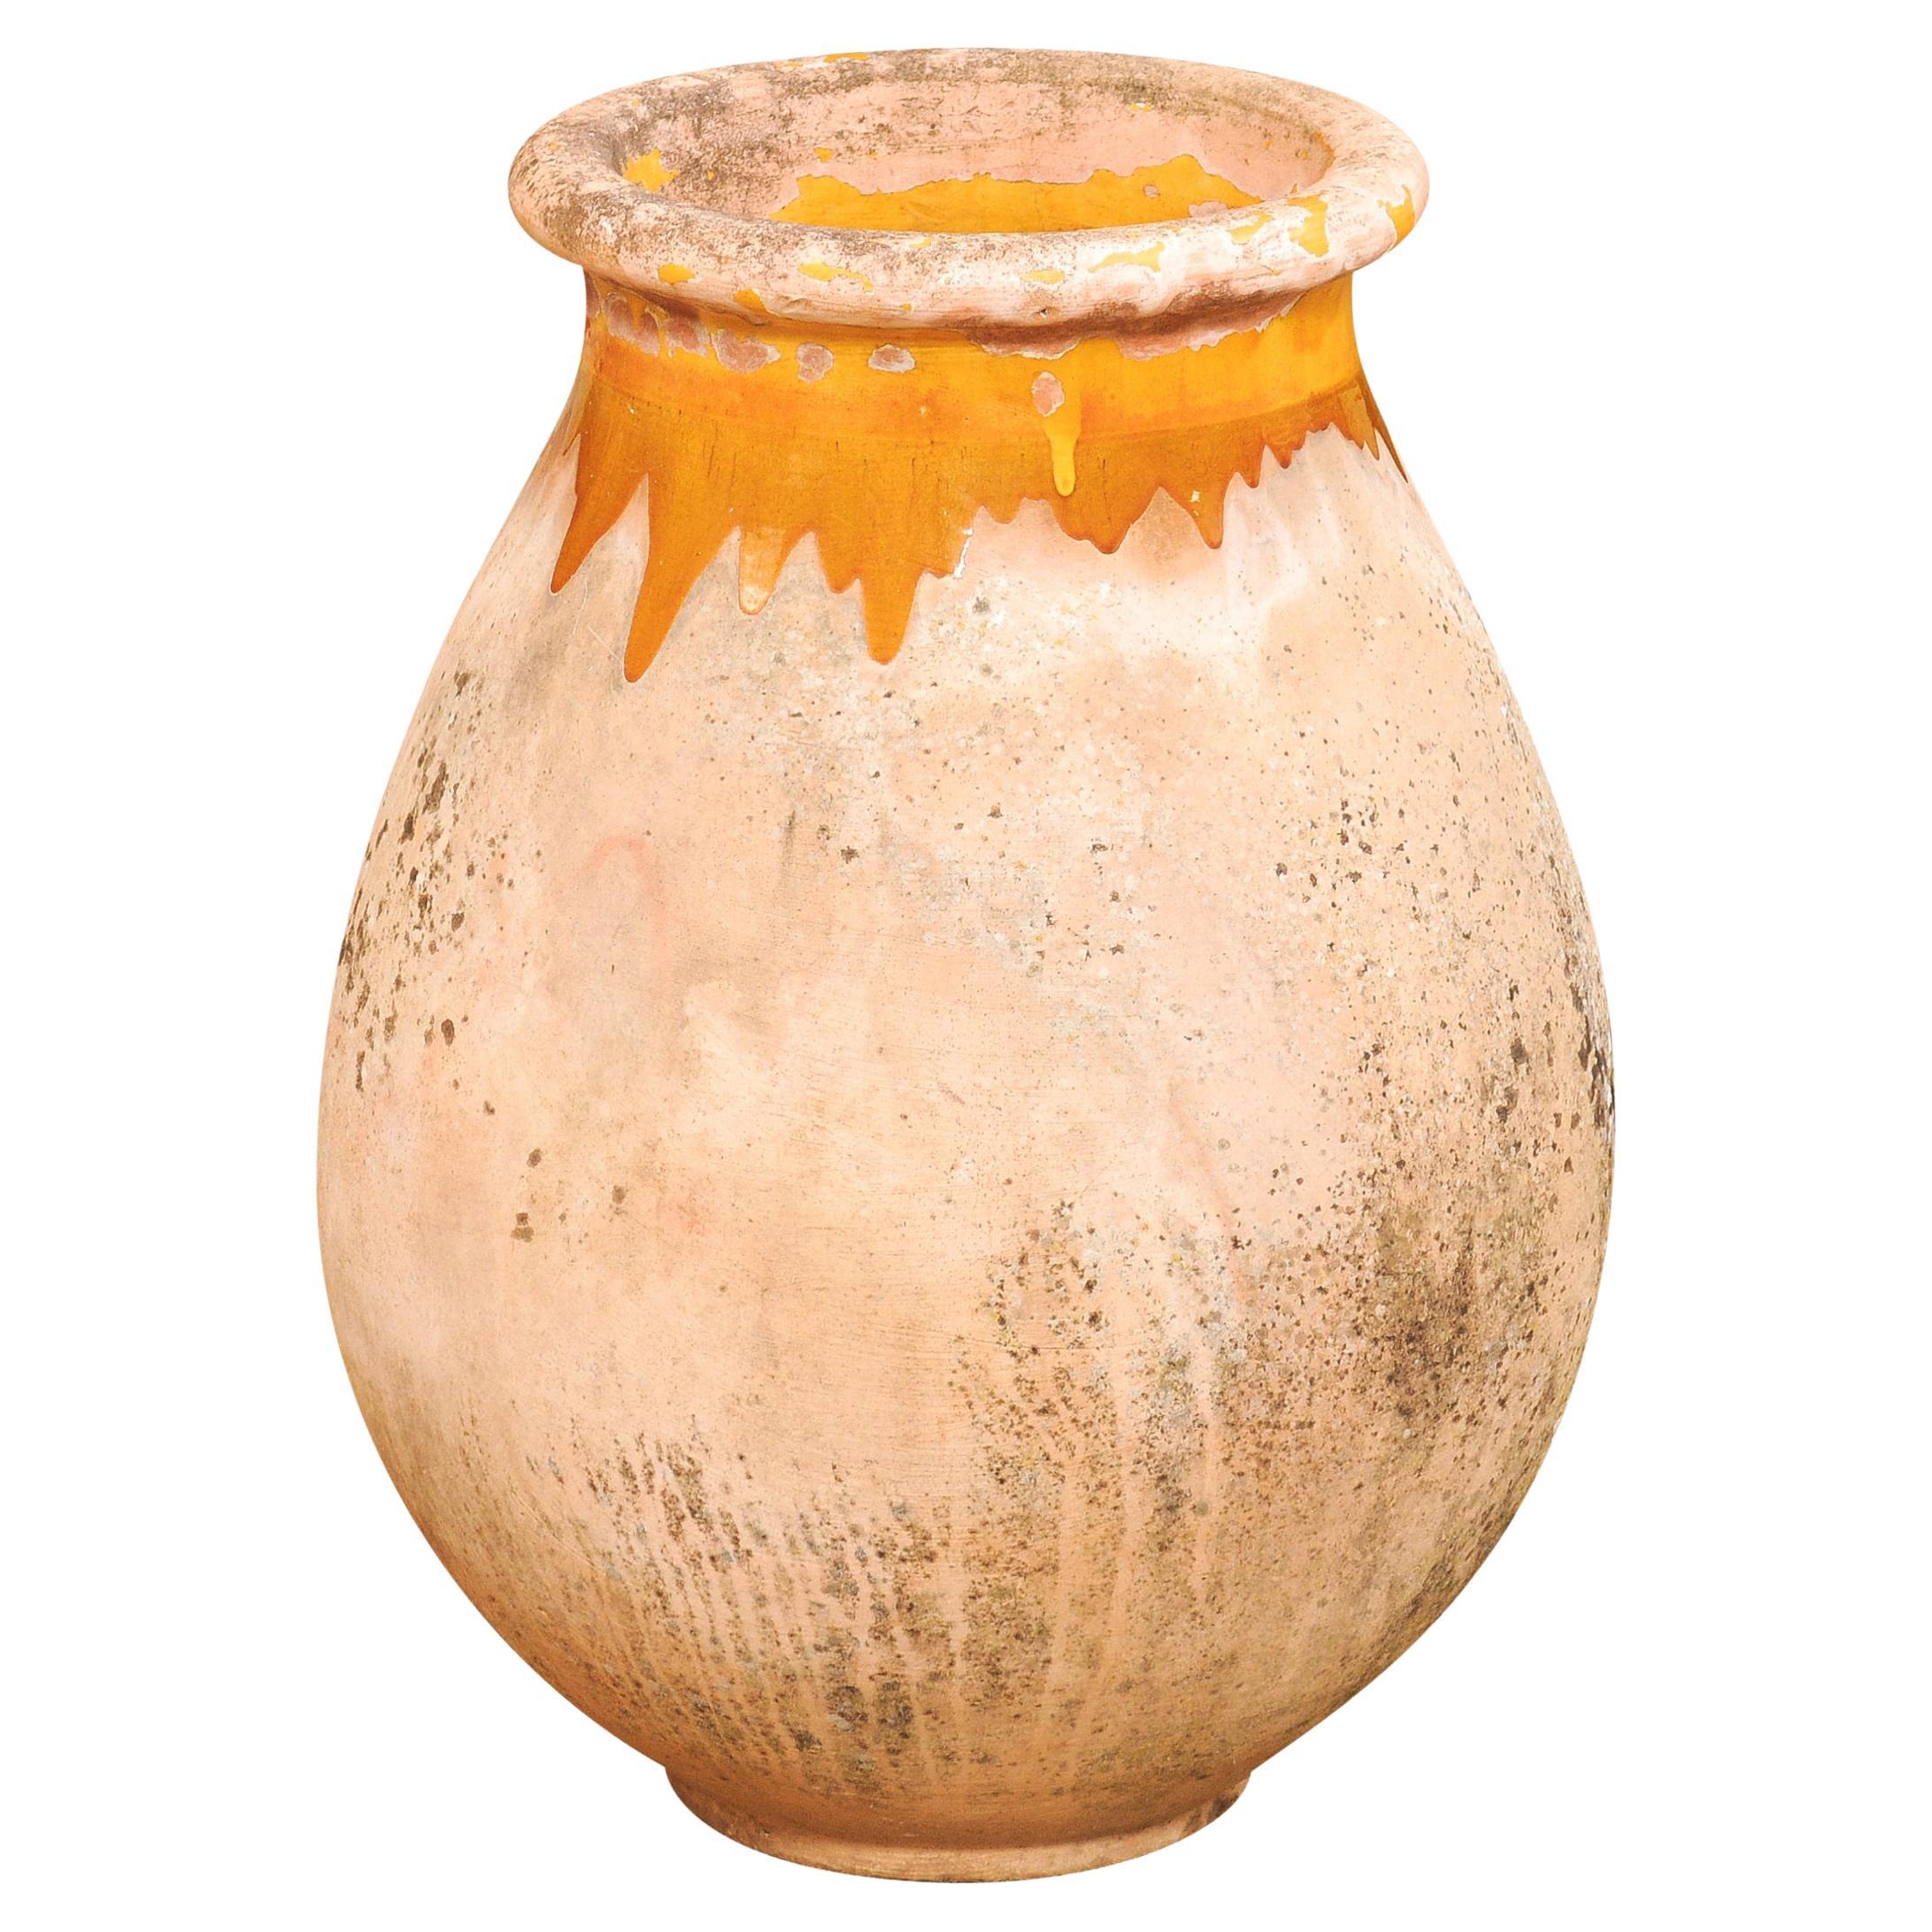 French 19th Century Biot Pottery Jar with Yellow Glaze and Dripping Effect